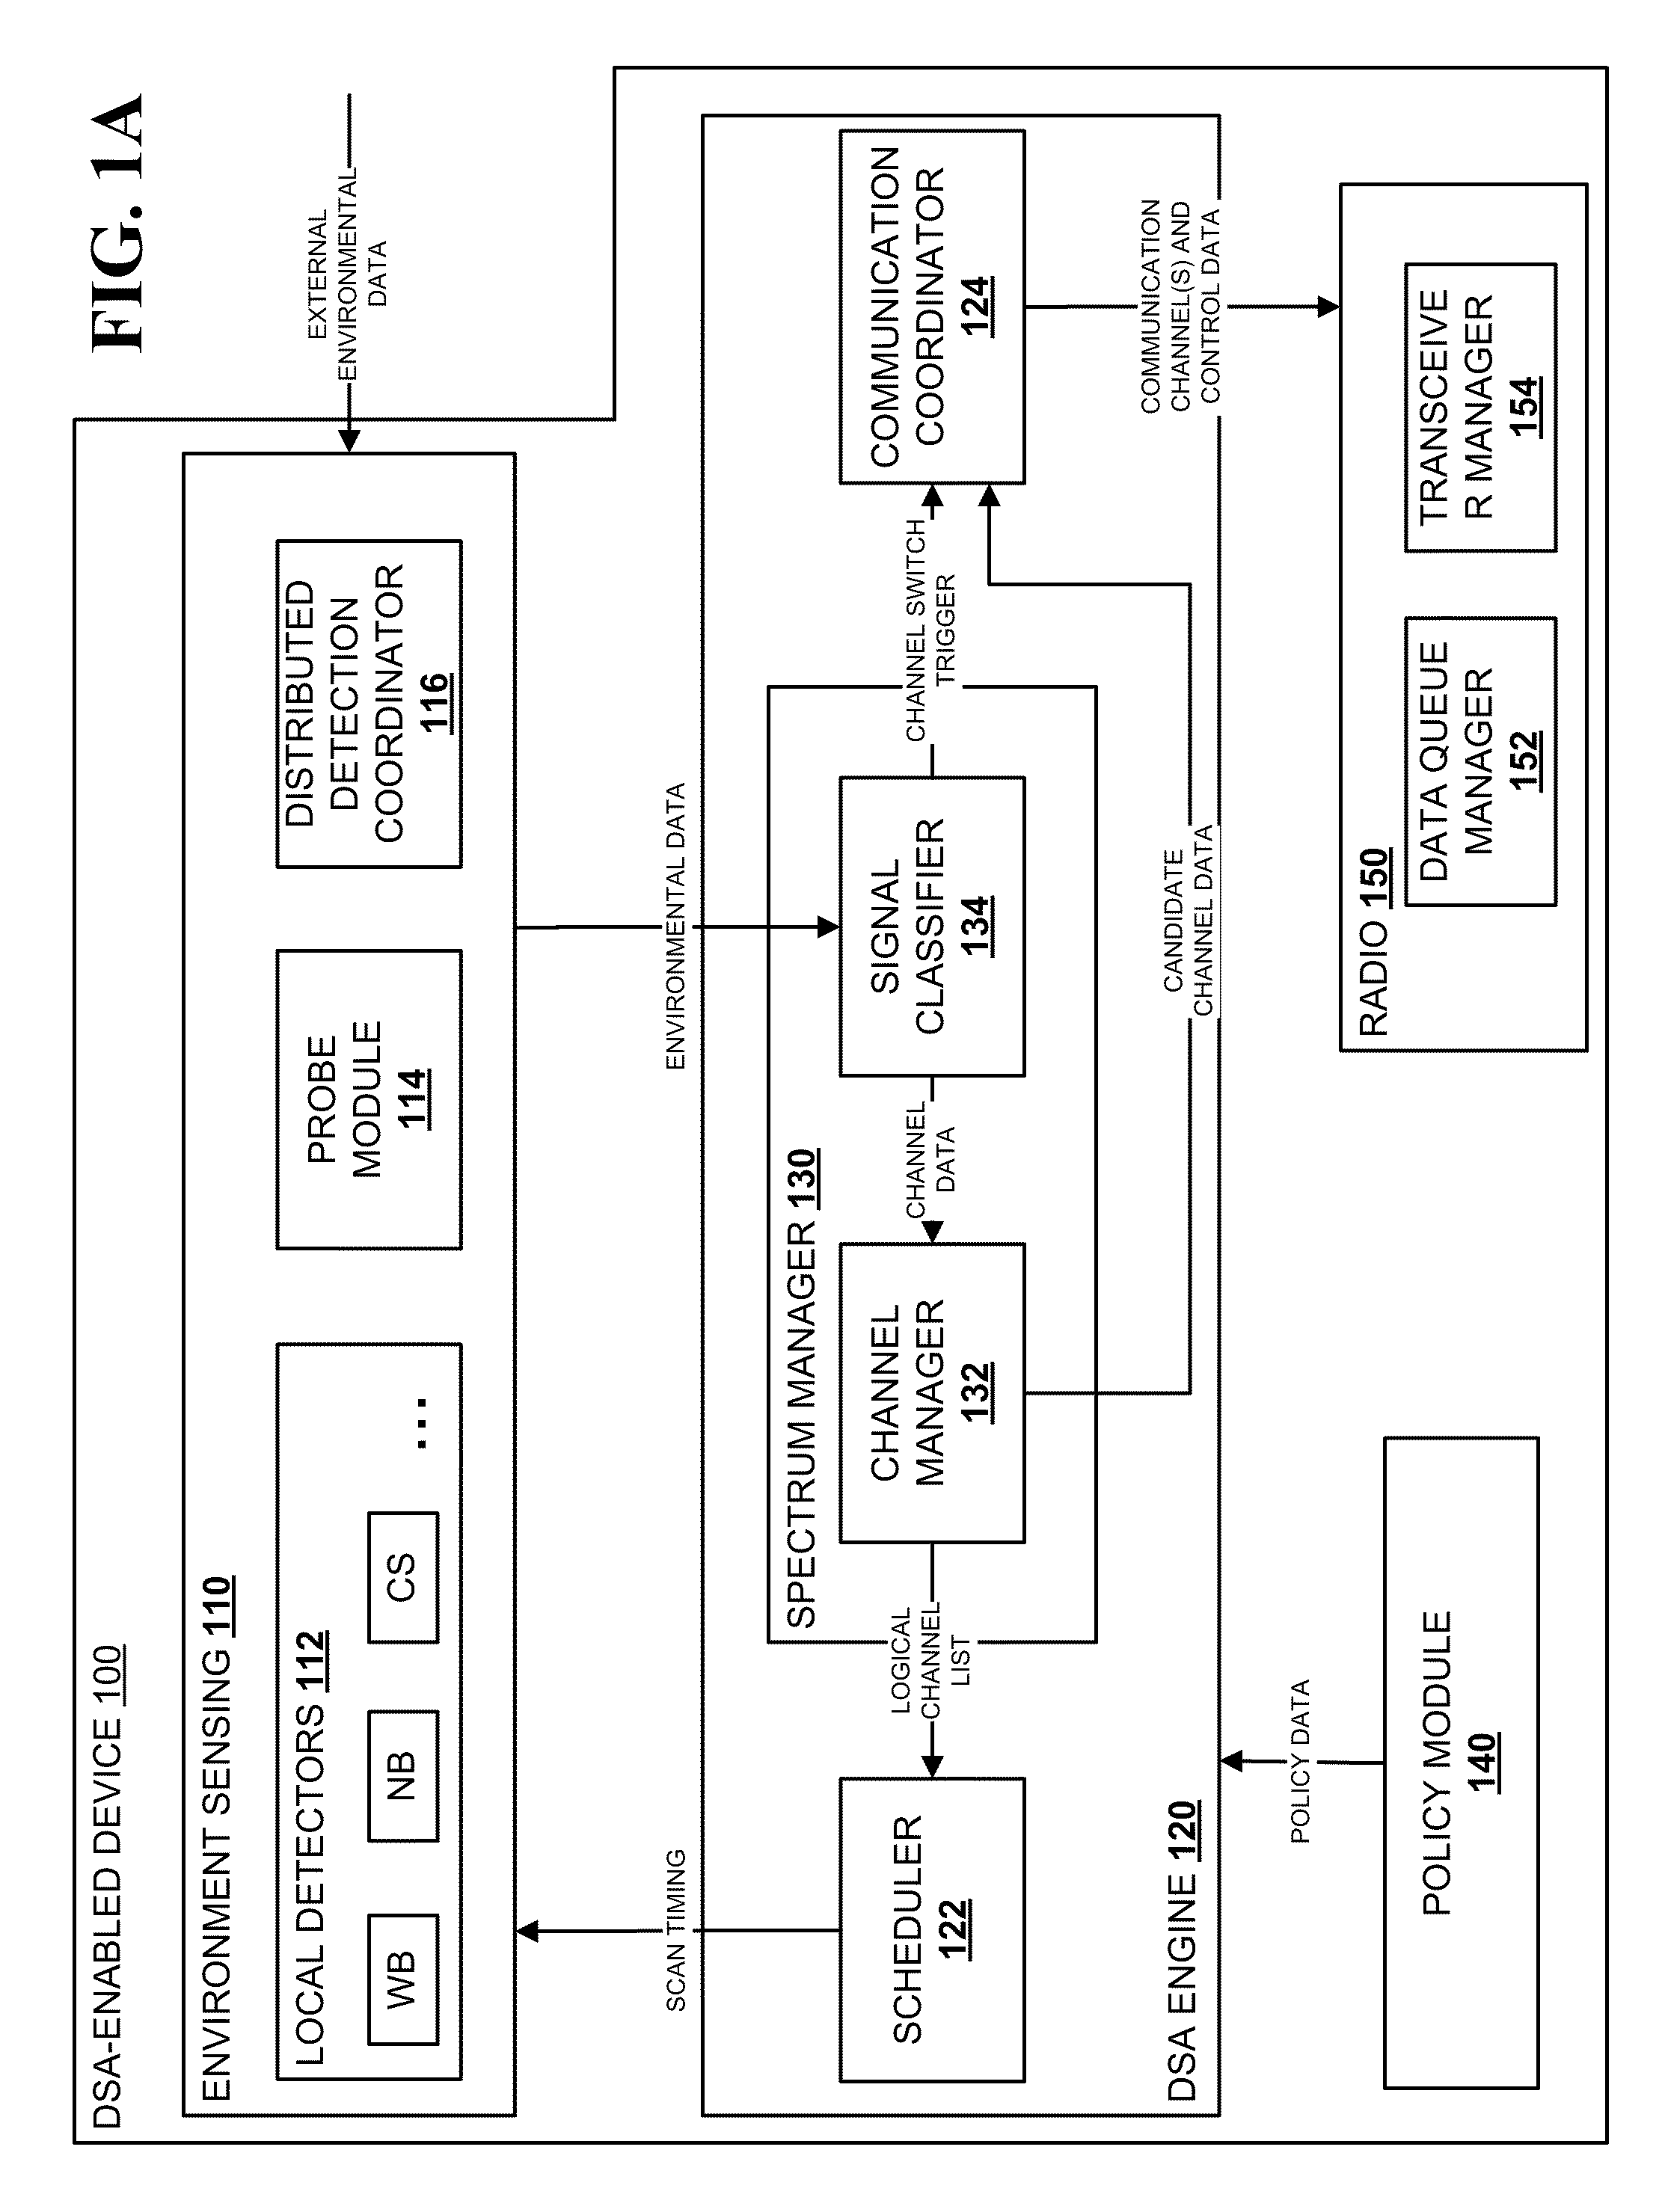 Method and System for Dynamic Spectrum Access